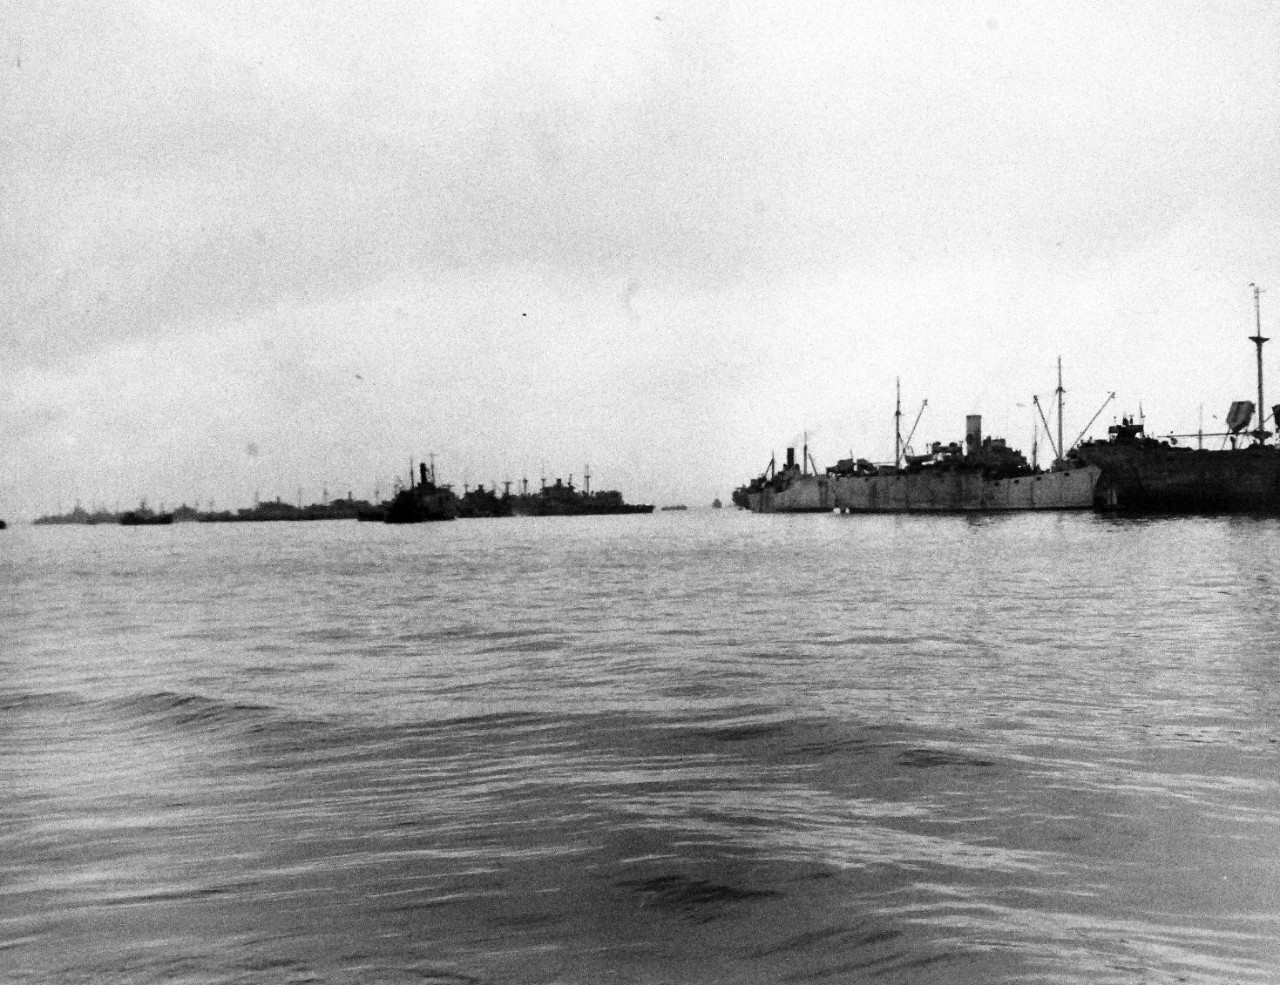 80-G-285124:  Normandy Invasion, Mulberries, June 1944.   A “Gooseberry,” a line of sunken ships forming part of a U.S. Mulberry, a man-made harbor off Omaha Beach, France, protecting landing craft from storms in English Channel.   Photograph released November 7, 1944.  U.S. Navy photograph, now in the collections of the National Archives.  (2016/03/15).